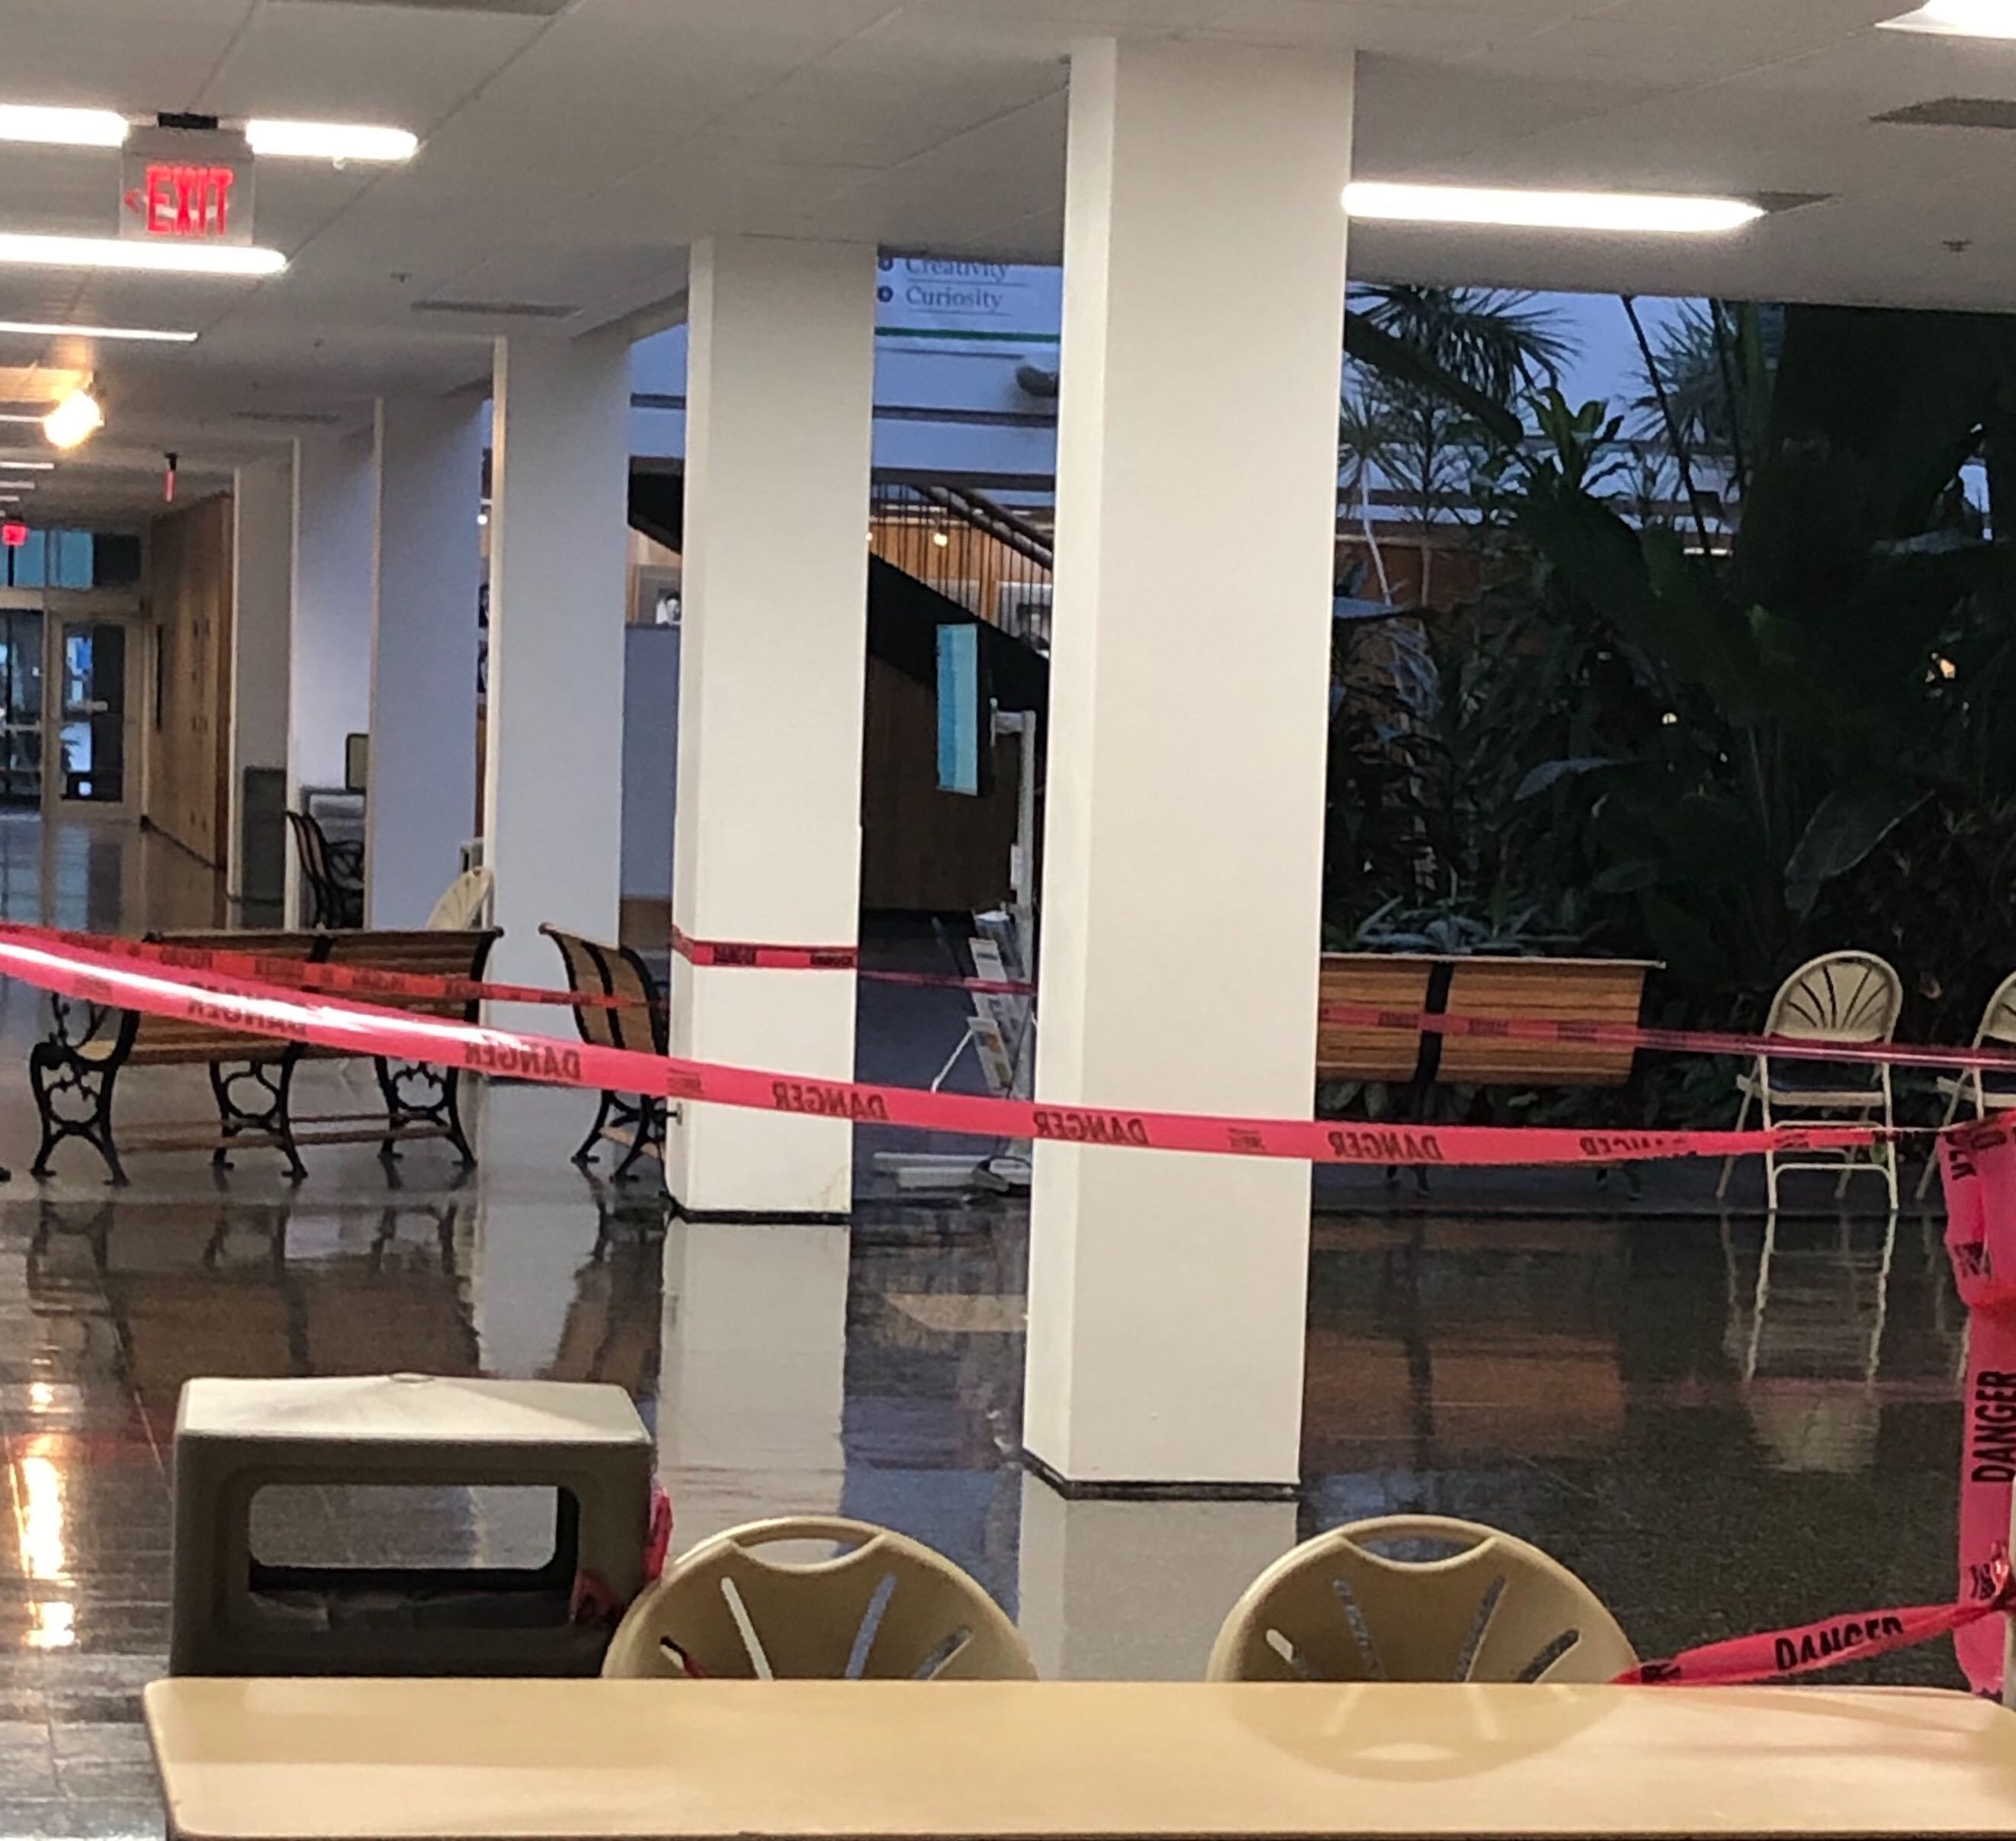 PHOTO: As part of renovation efforts by UHCL, the bulletin spaces in Atrium I have been removed. Additionally, the floors of the Bayou Building are being refurbished. Photo by The Signal Editor-in-Chief Brandon Peña.